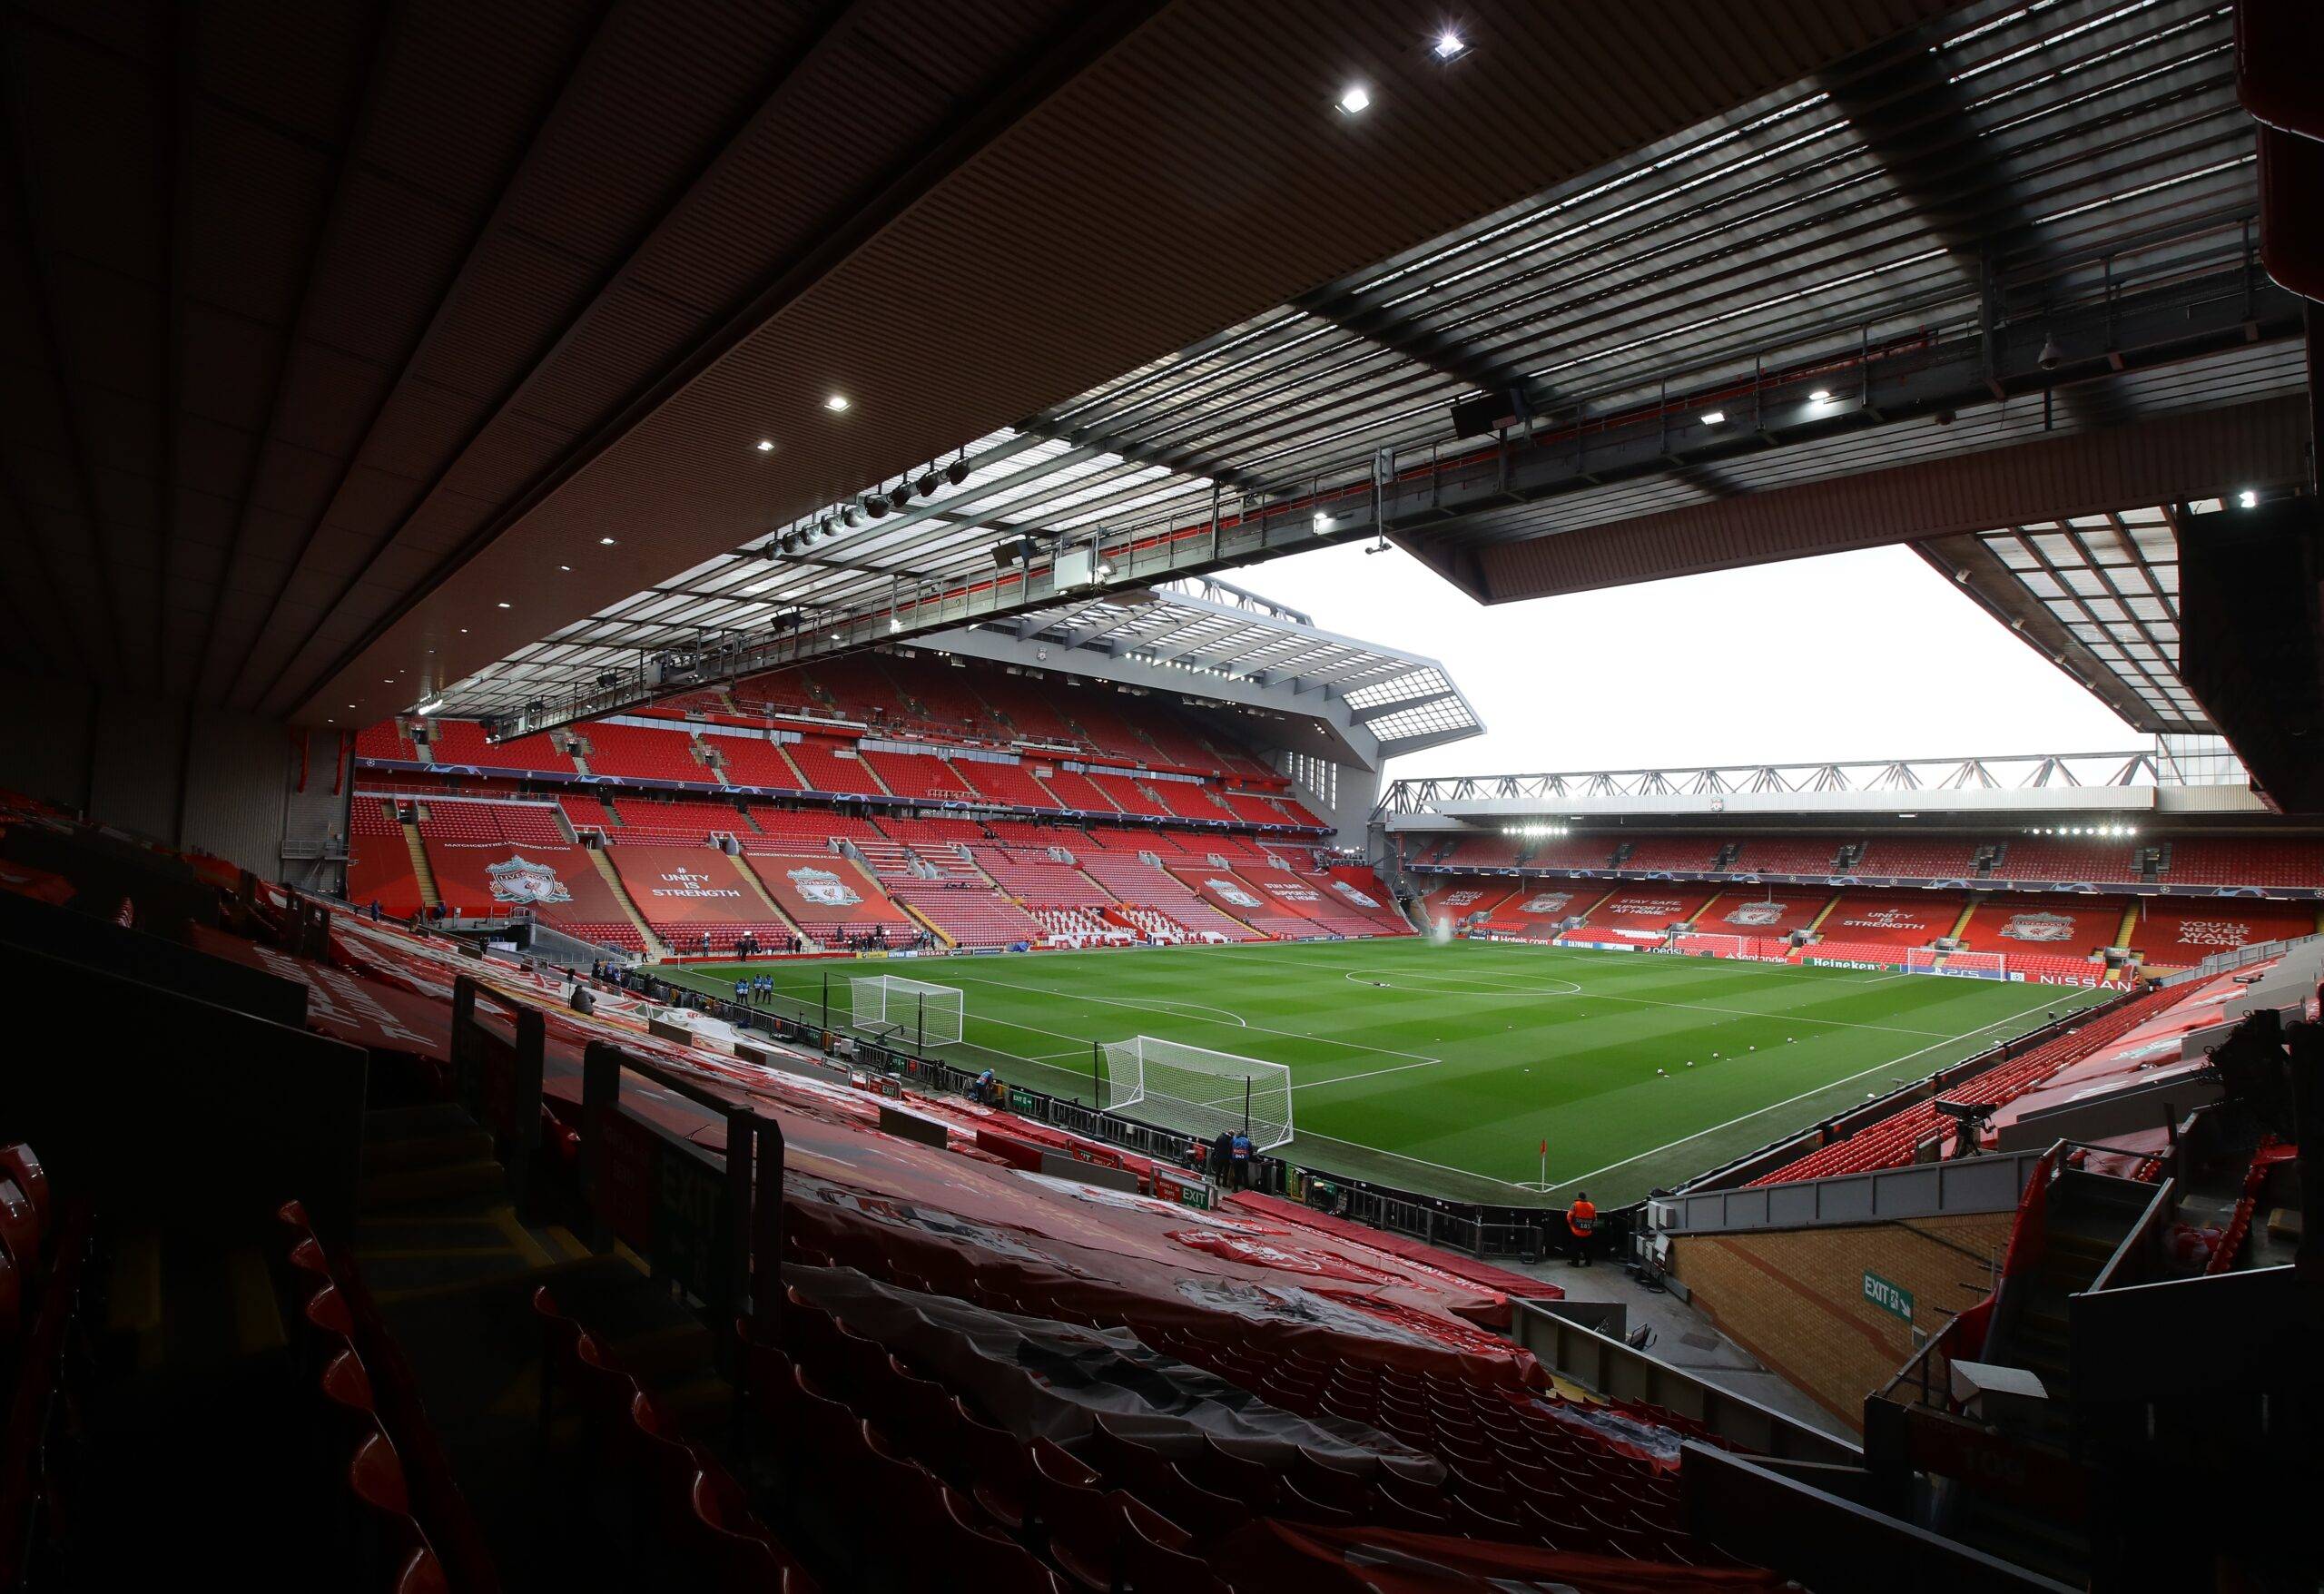 Liverpool play at Anfield.